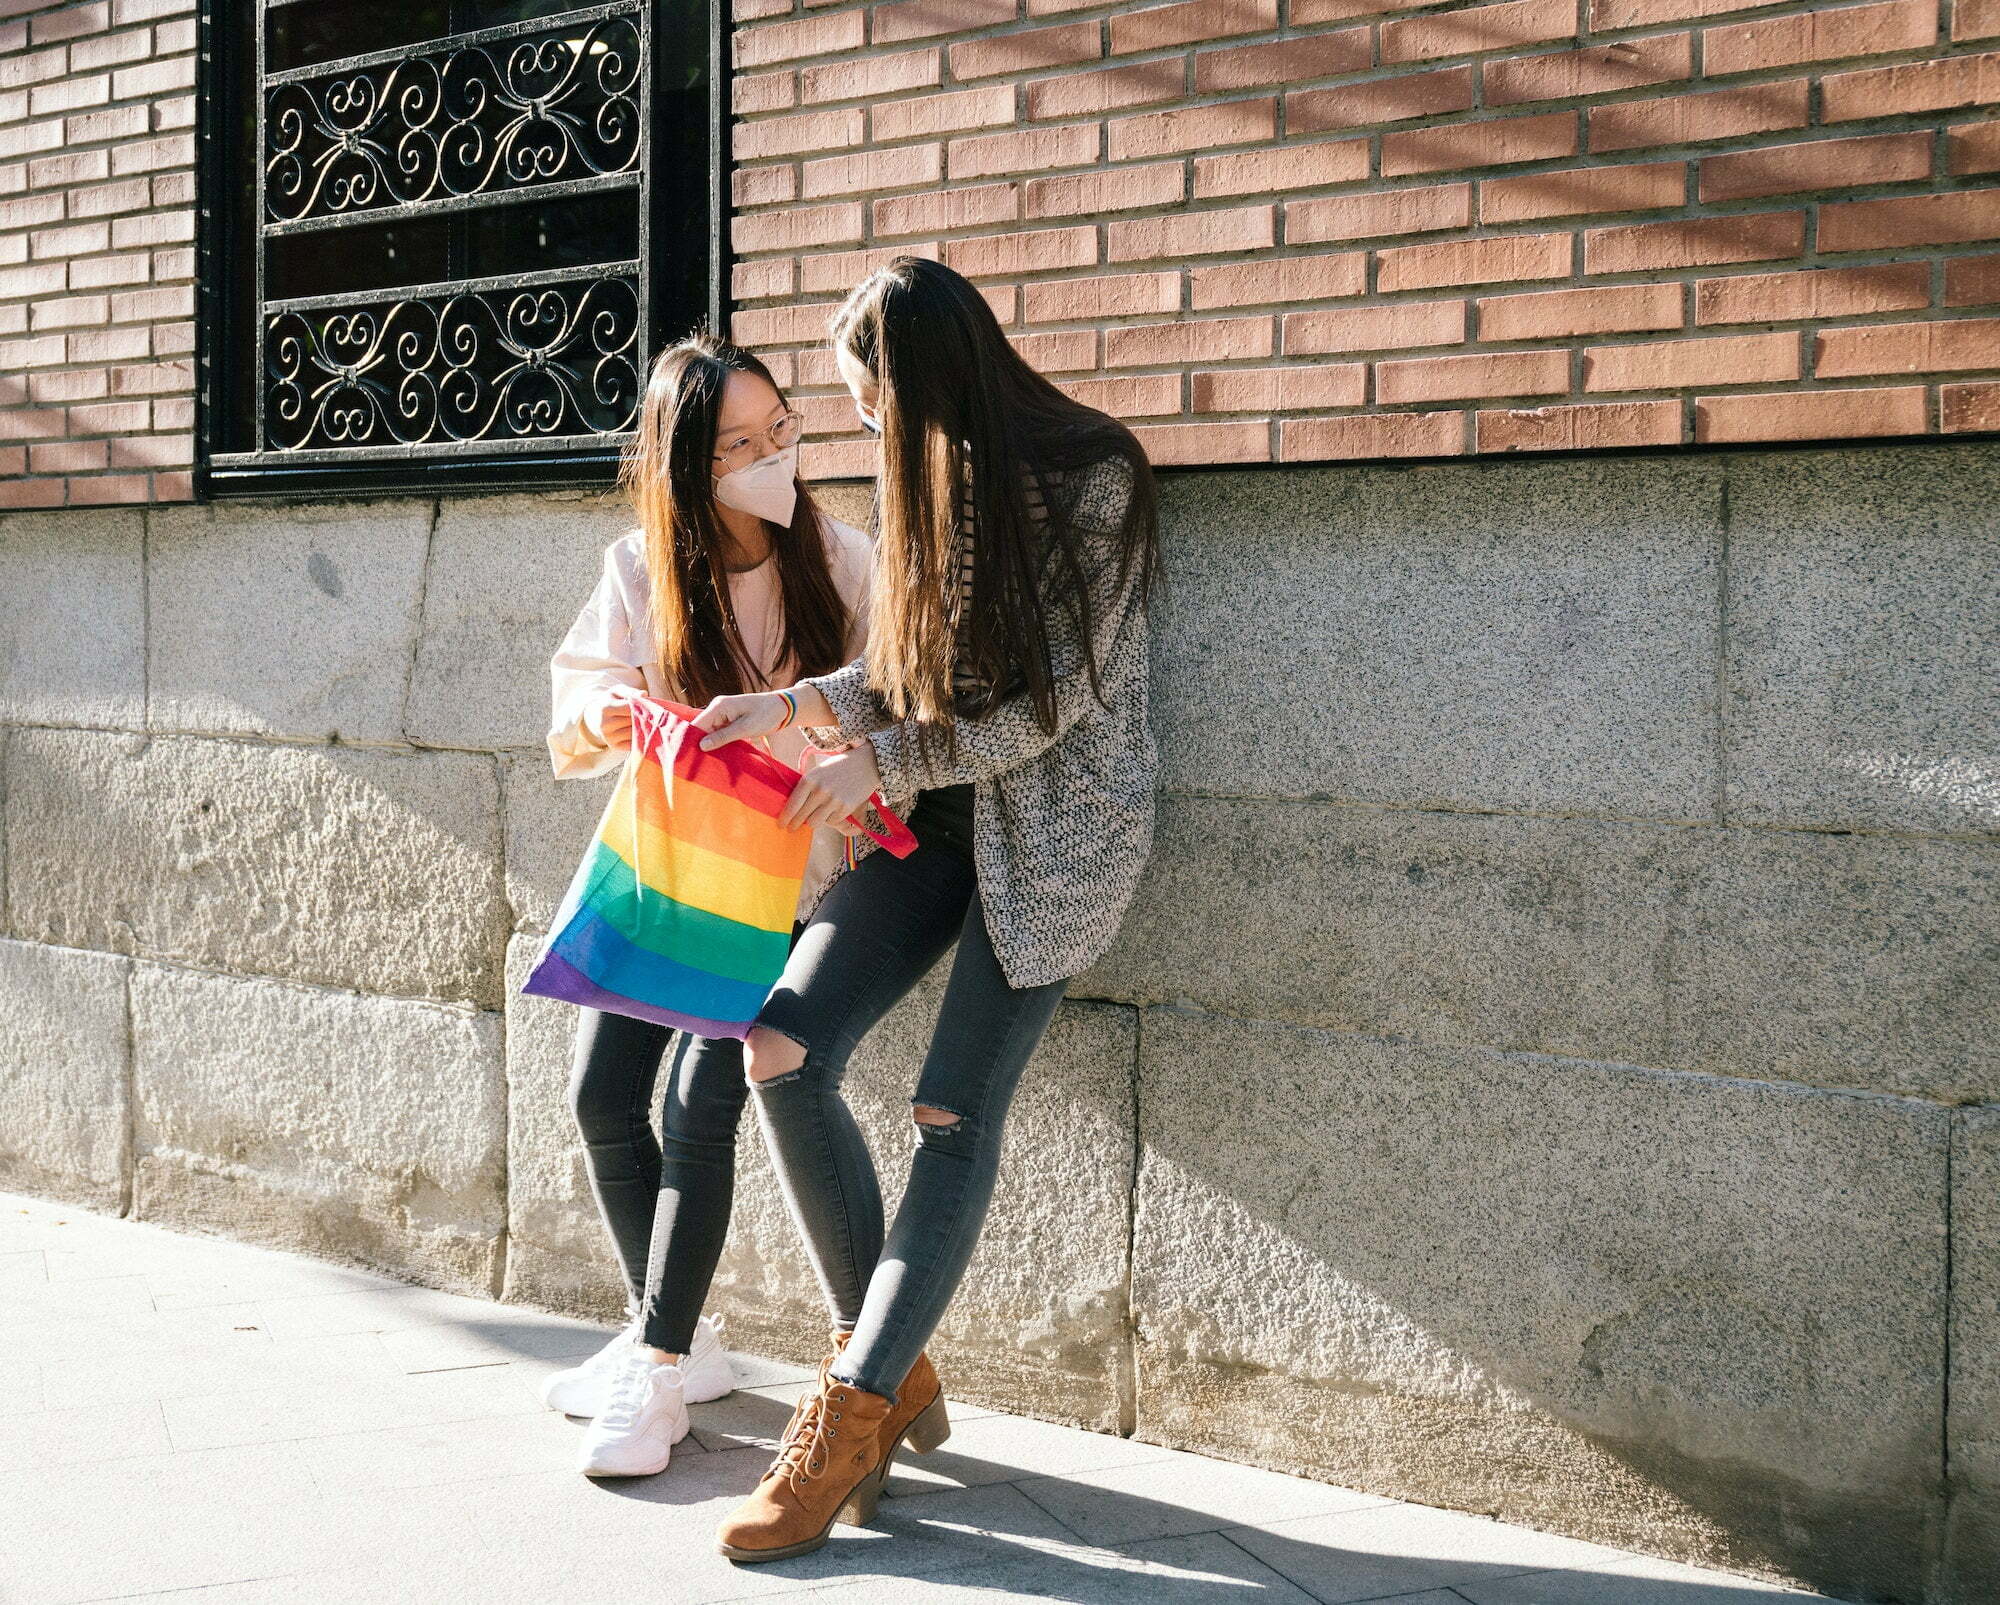 Lesbian couple with rainbow shopping bag in city